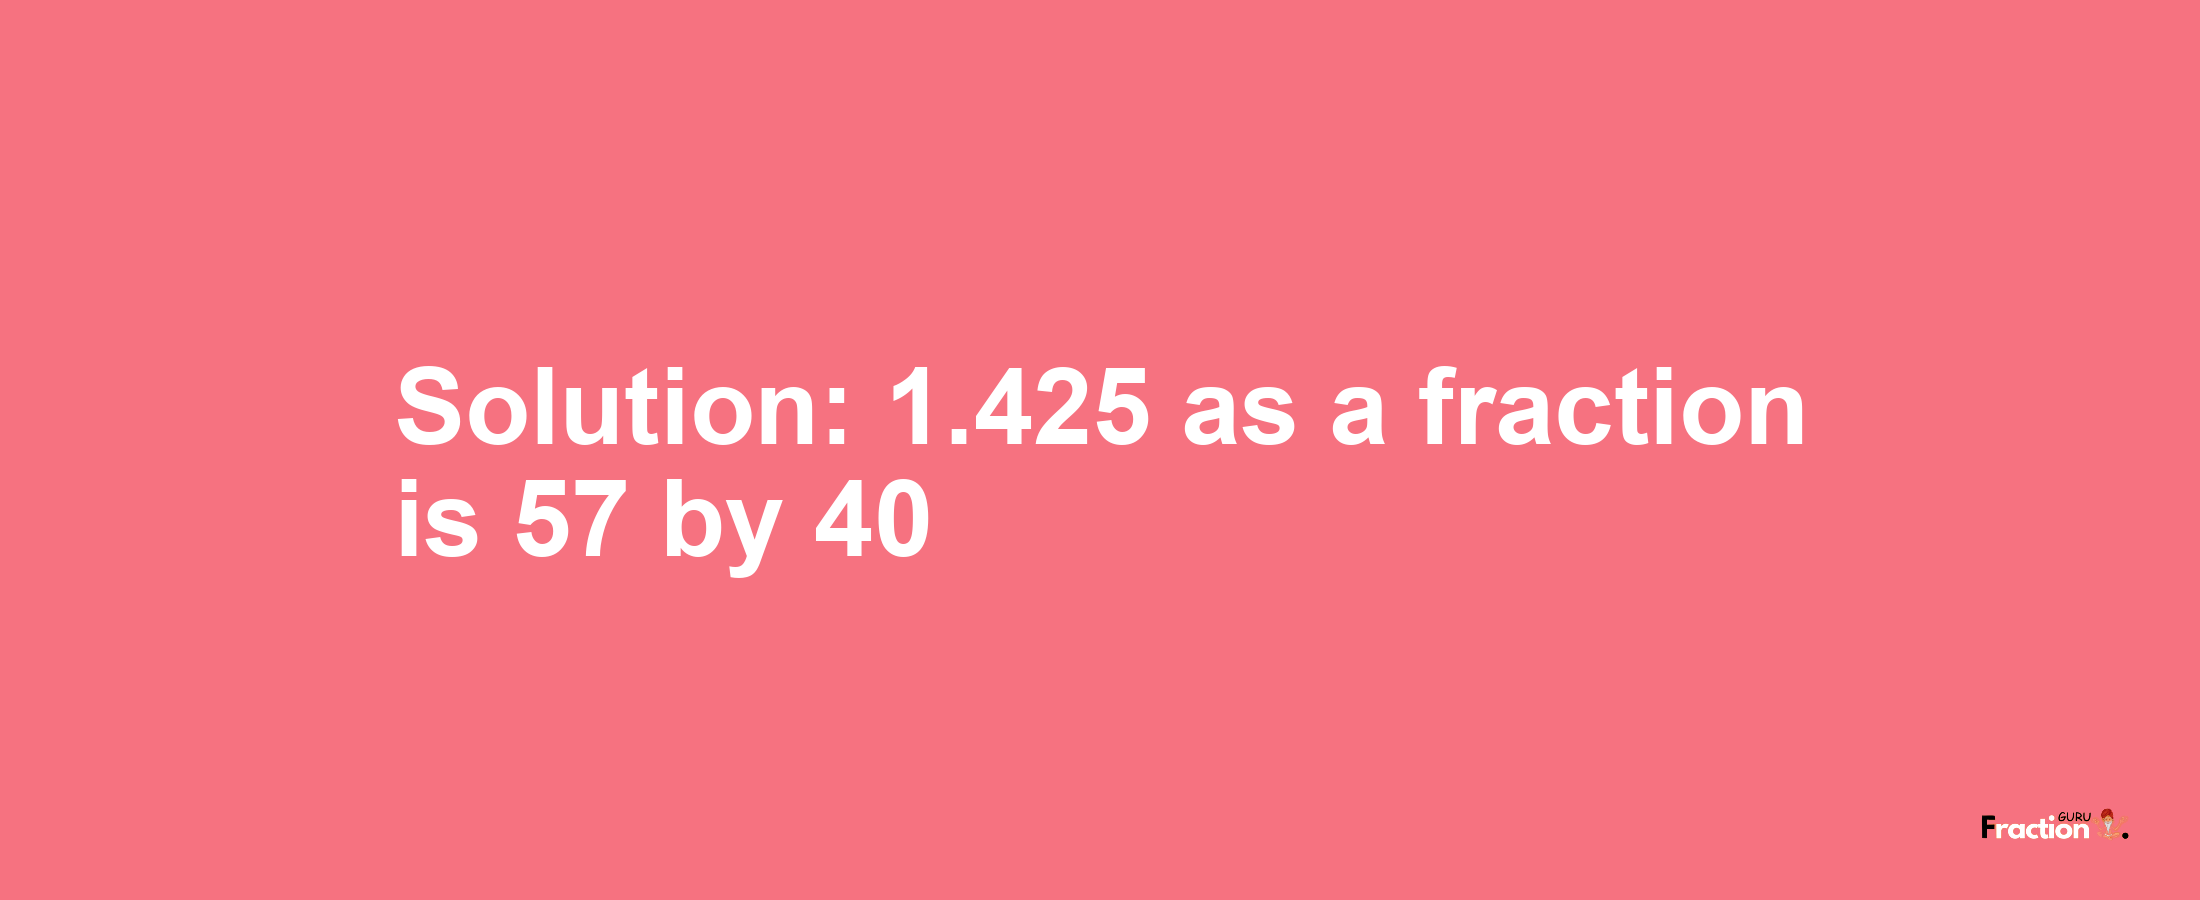 Solution:1.425 as a fraction is 57/40